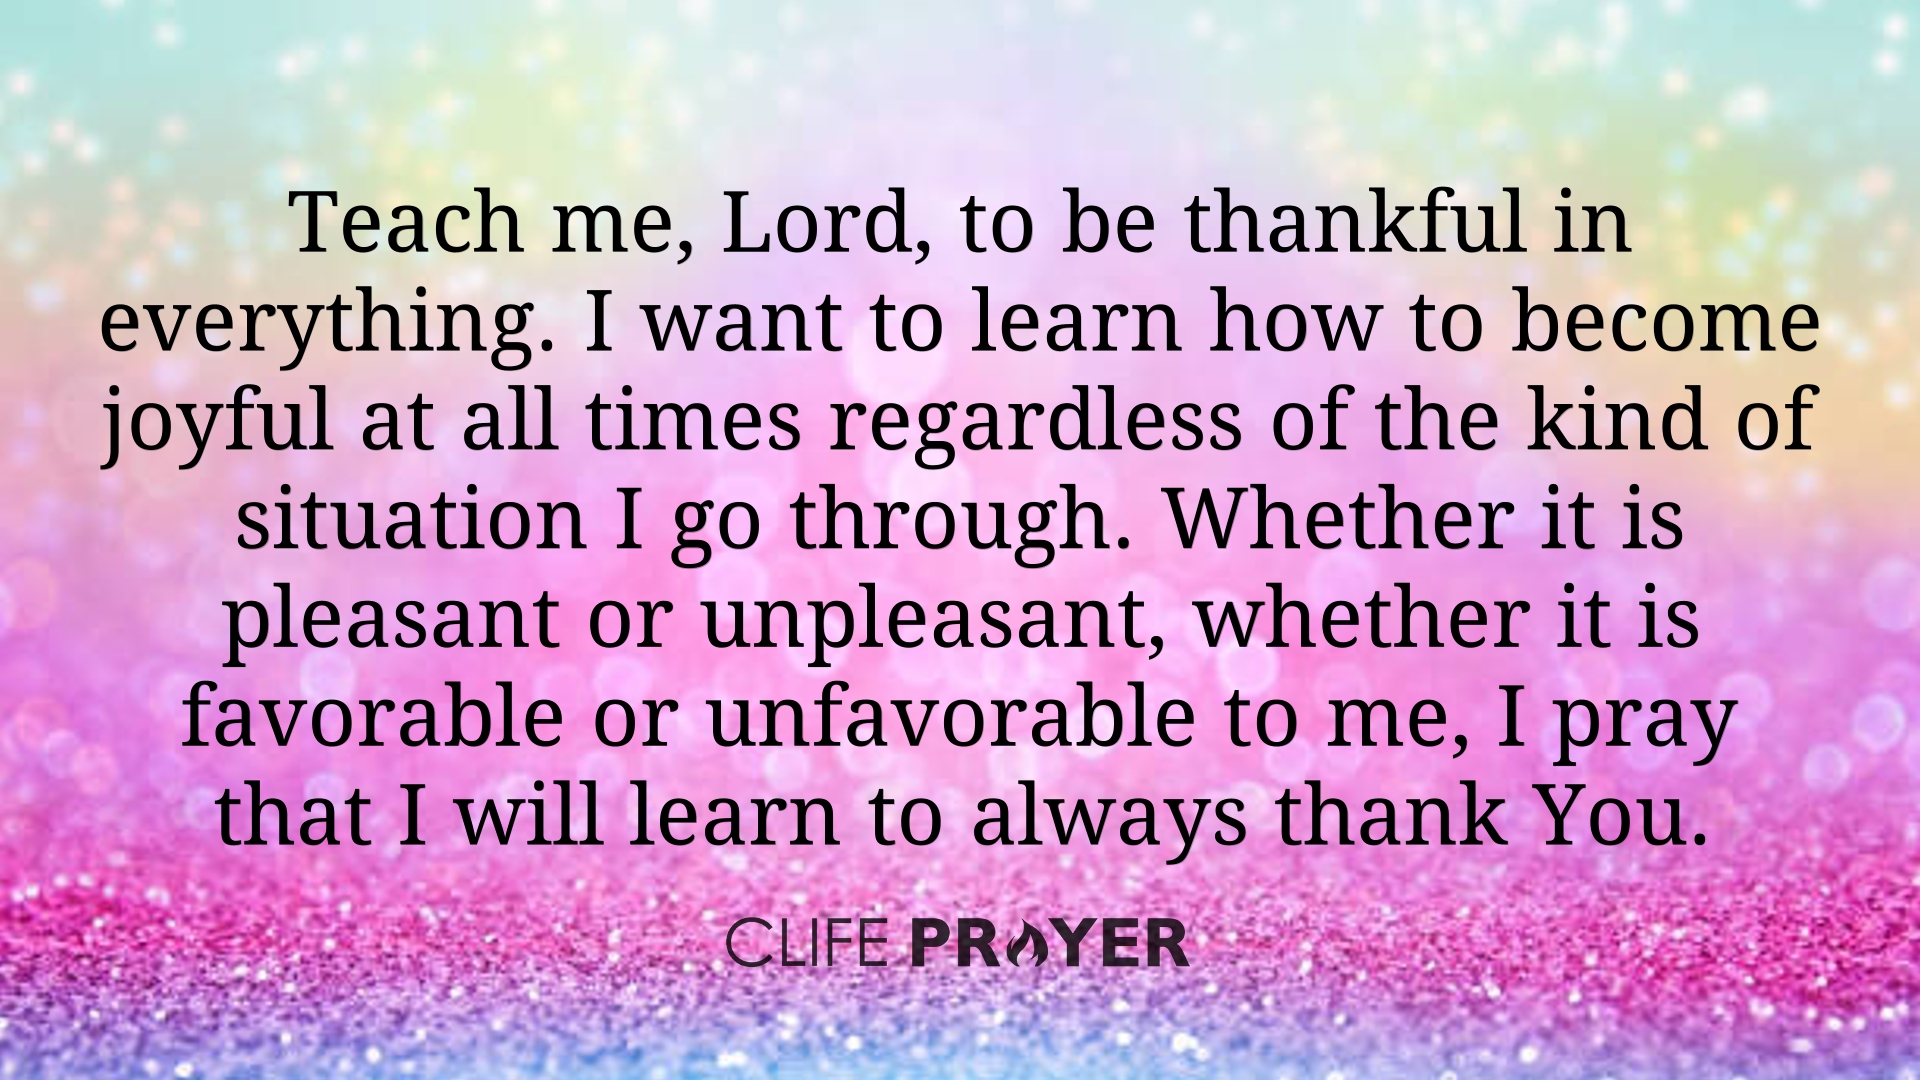 Prayer to Learn How to be Thankful in Every Situation